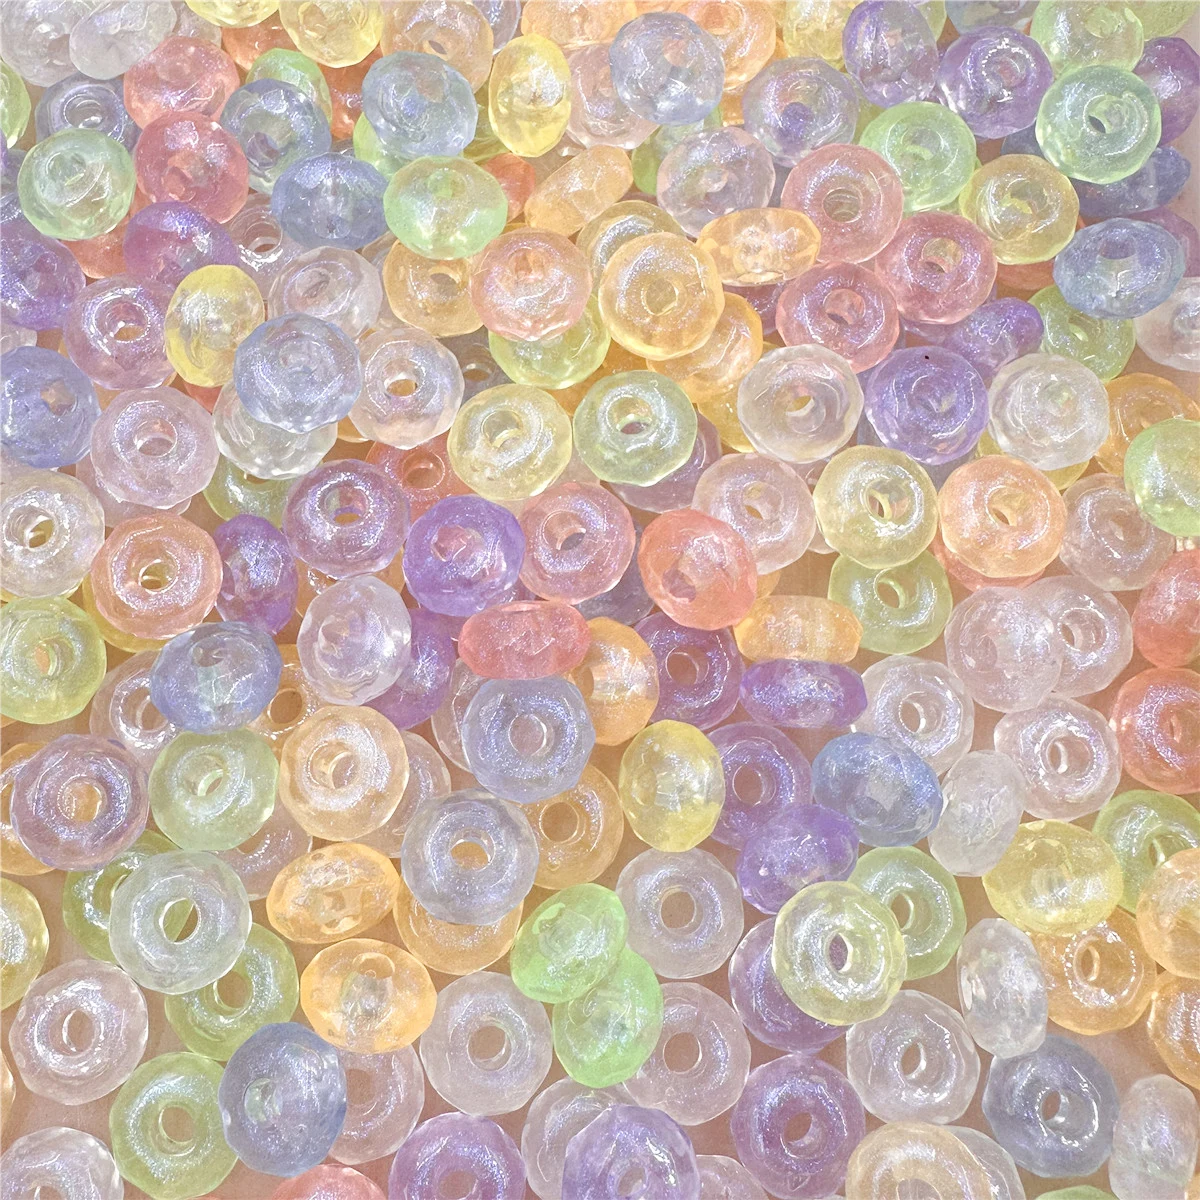 

15.5mm 20pcs Acrylic Jelly Color Transparent Round Beads For Jewelry Making Handmade Bracelet Necklace Keychain DIY Materials